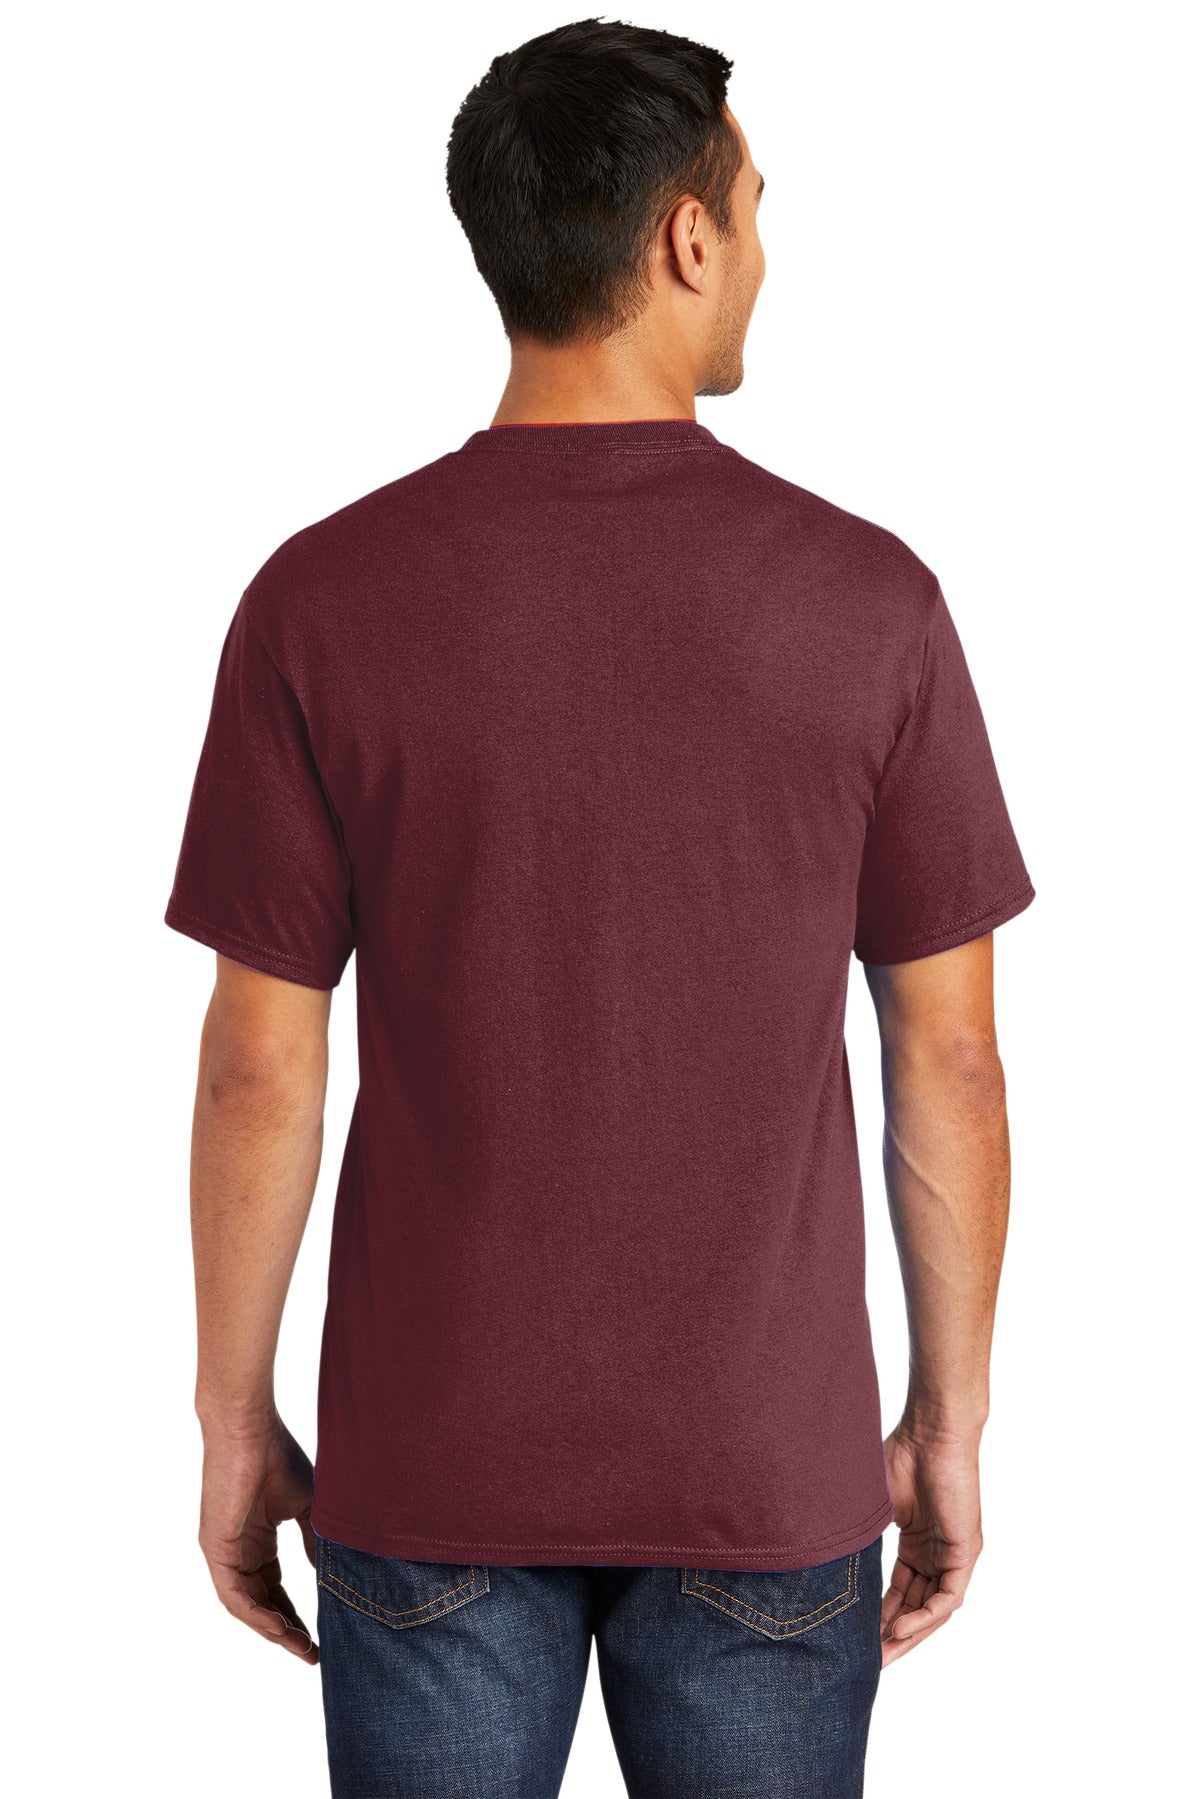 Swaasi Core - P&C® 5.5 oz 50/50 TALL T-Shirt with Extra Color Print Logo